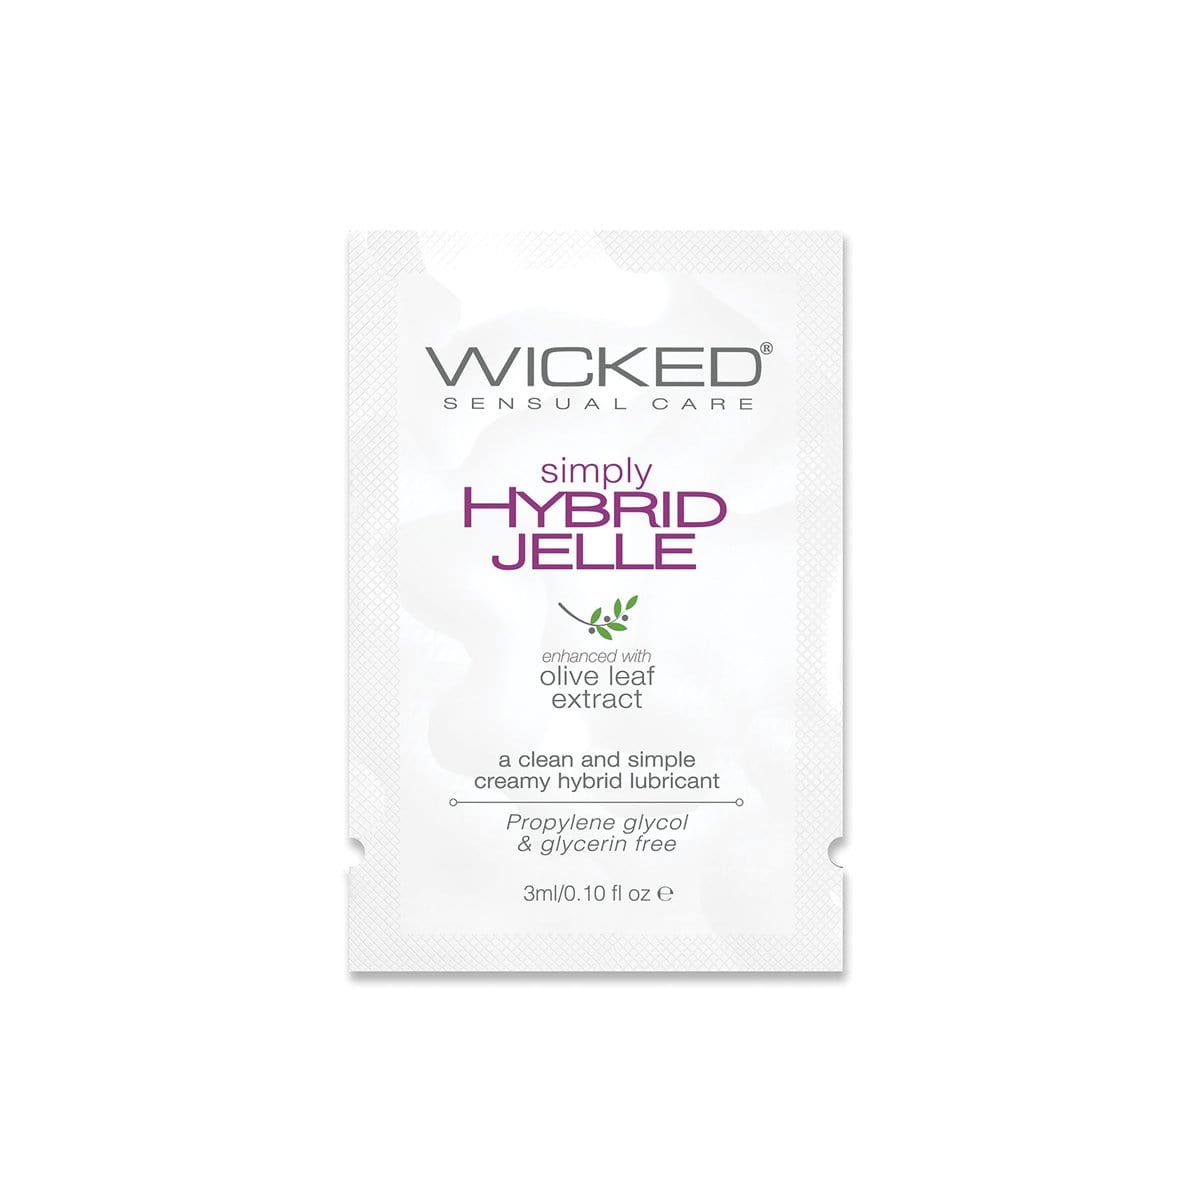 Copy of Wicked - Simply Hybrid Jelle Lubricant Sachet 3ml Lube (Silicone Based) 713079912104 CherryAffairs